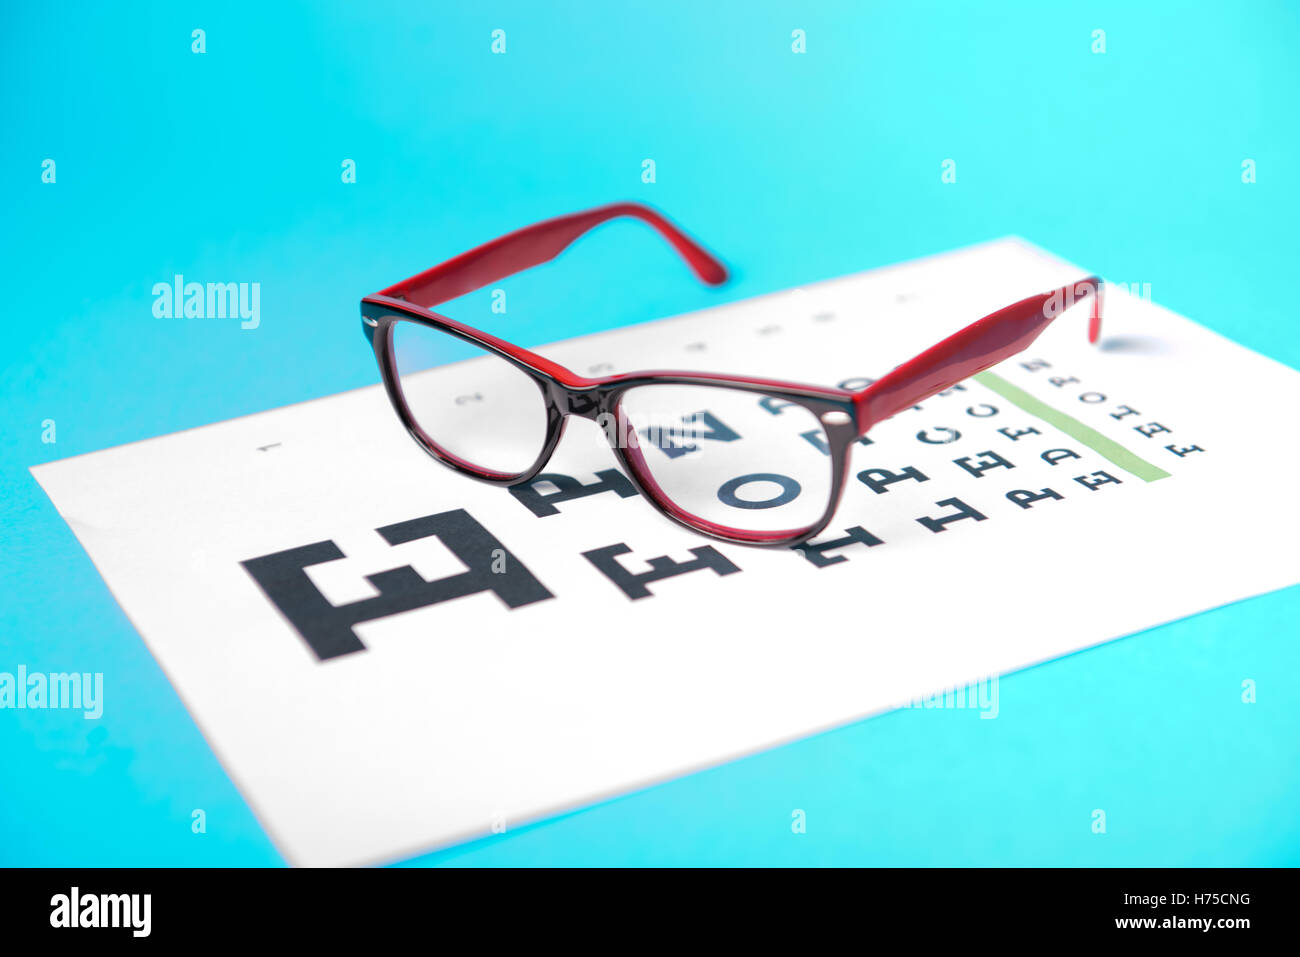 https://c8.alamy.com/comp/H75CNG/close-up-view-of-glasses-lying-on-snellen-test-chart-H75CNG.jpg